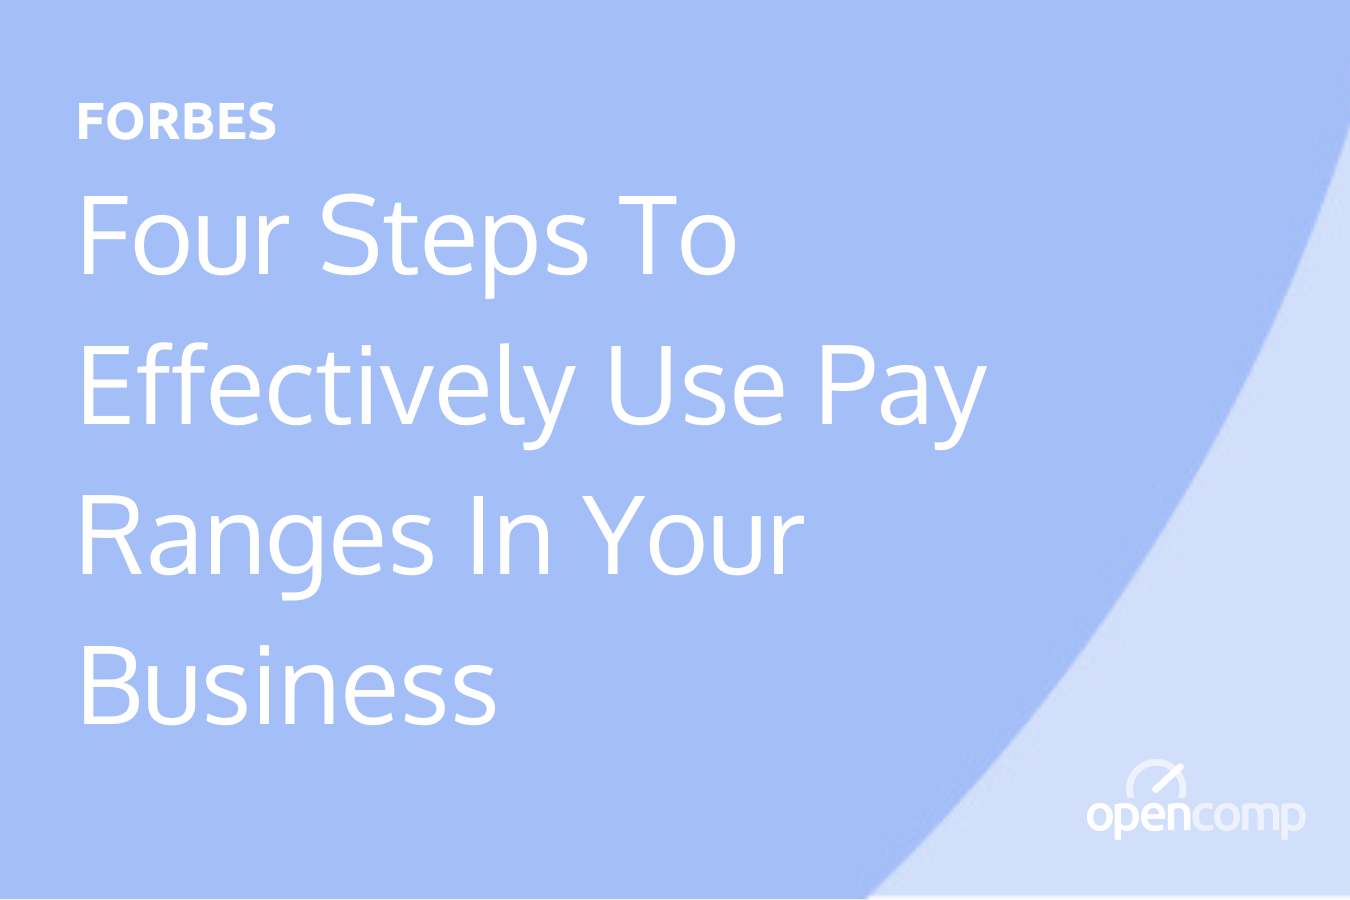 Four Steps To Effectively Use Pay Ranges In Your Business